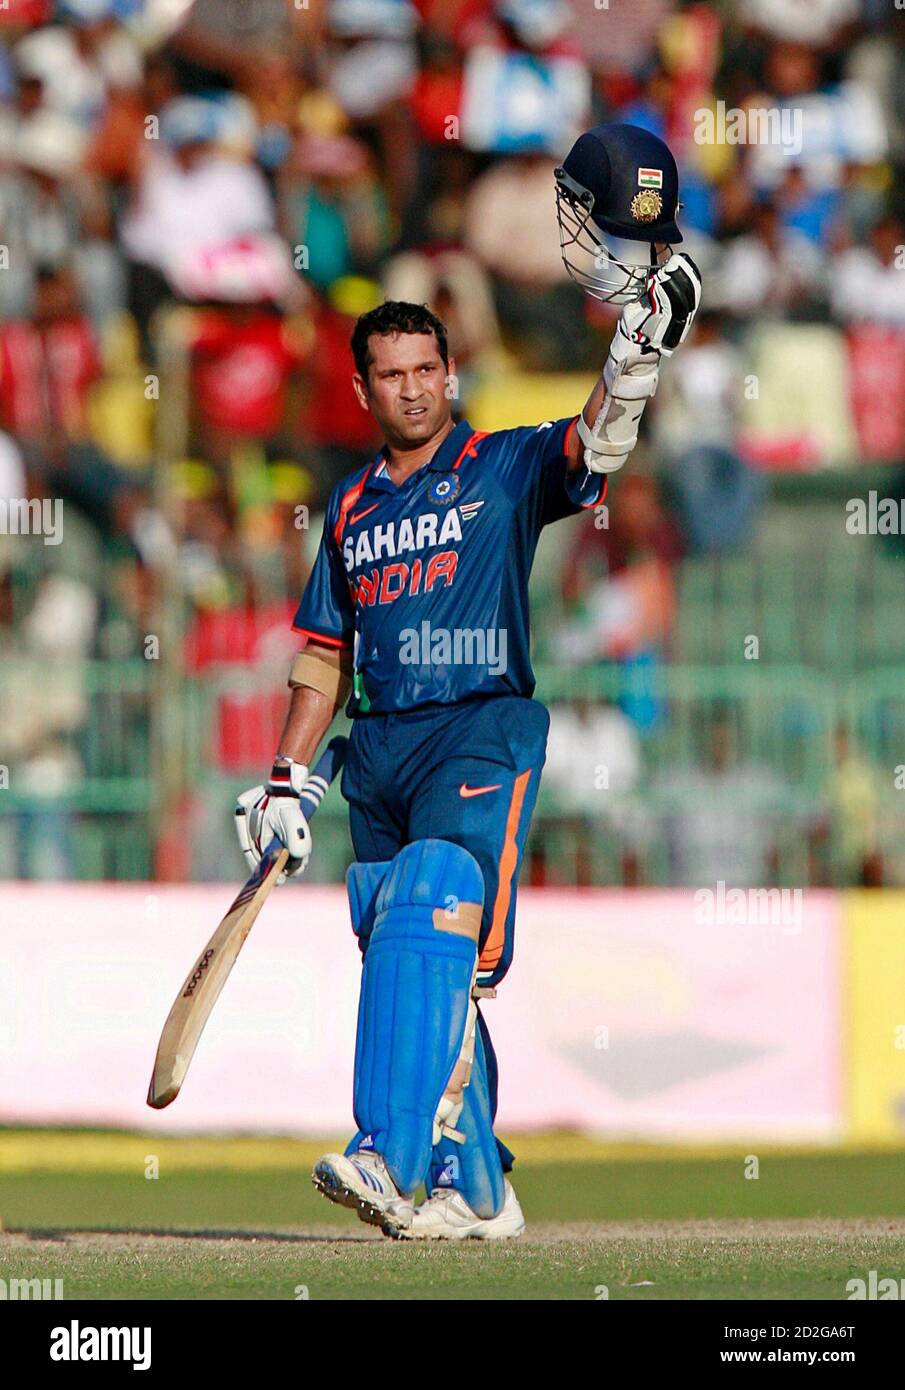 India's Sachin Tendulkar holds up his helmet to celebrate scoring a century  (100 runs) during the finals of the tri-nations one-day international  cricket series against Sri Lanka in Colombo September 14, 2009.